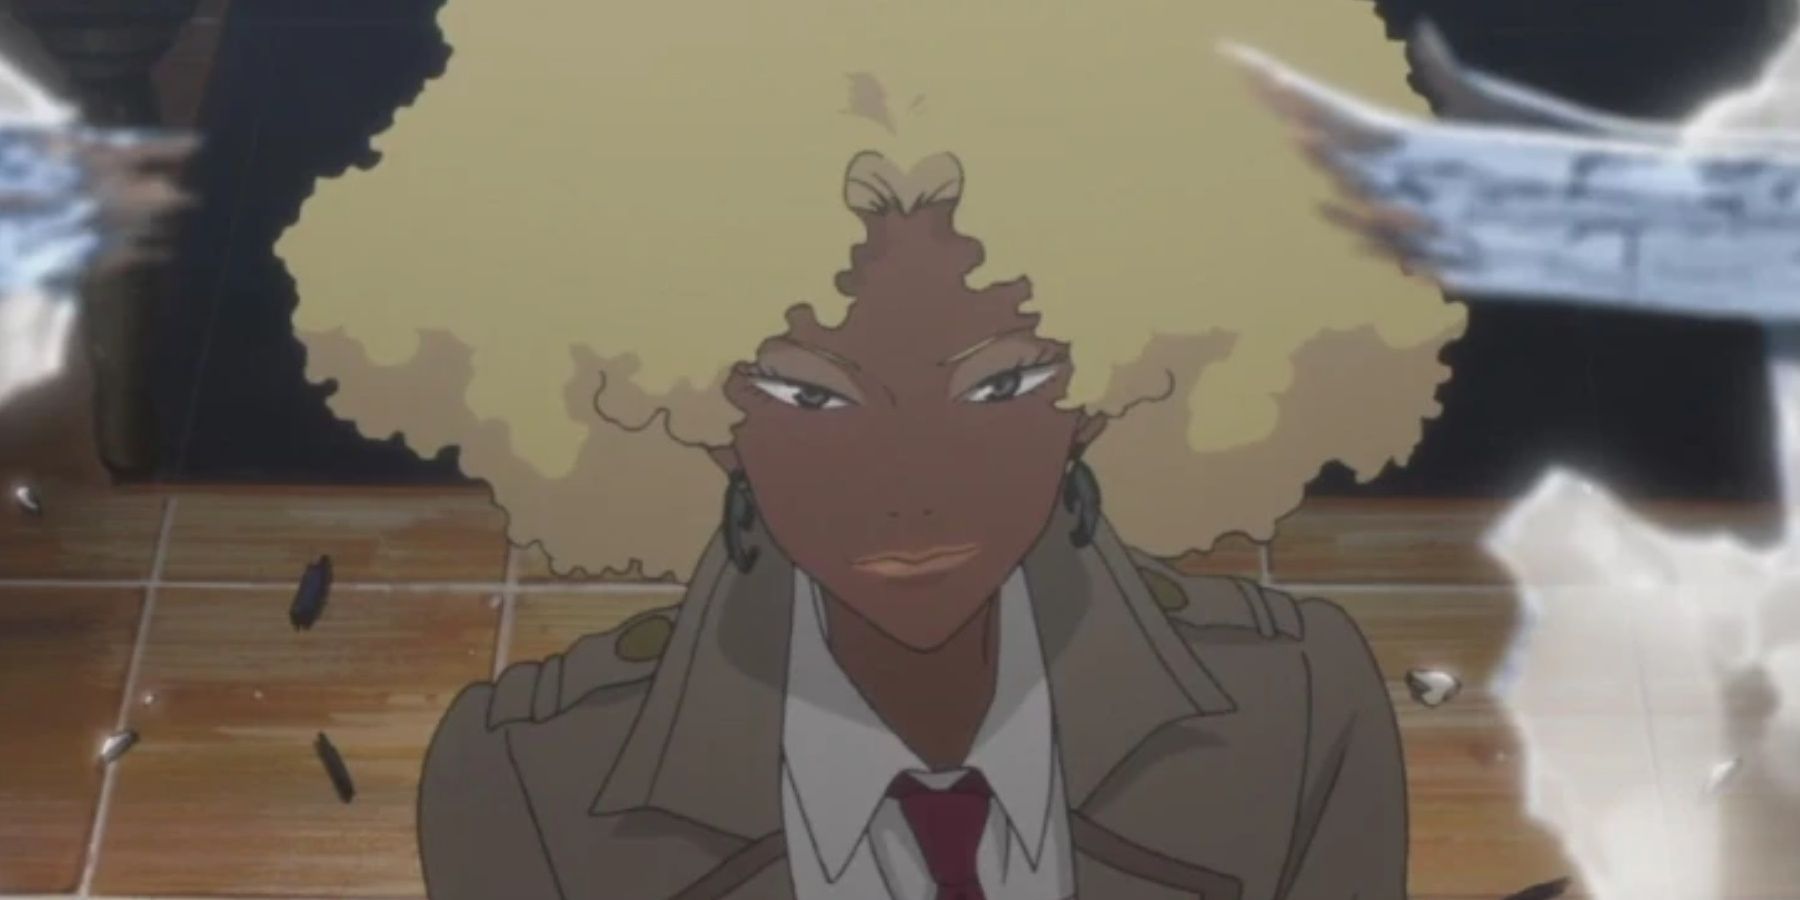 michiko and hatchin | Tumblr | Cartoon profile pictures, Girl cartoon  characters, Black anime characters